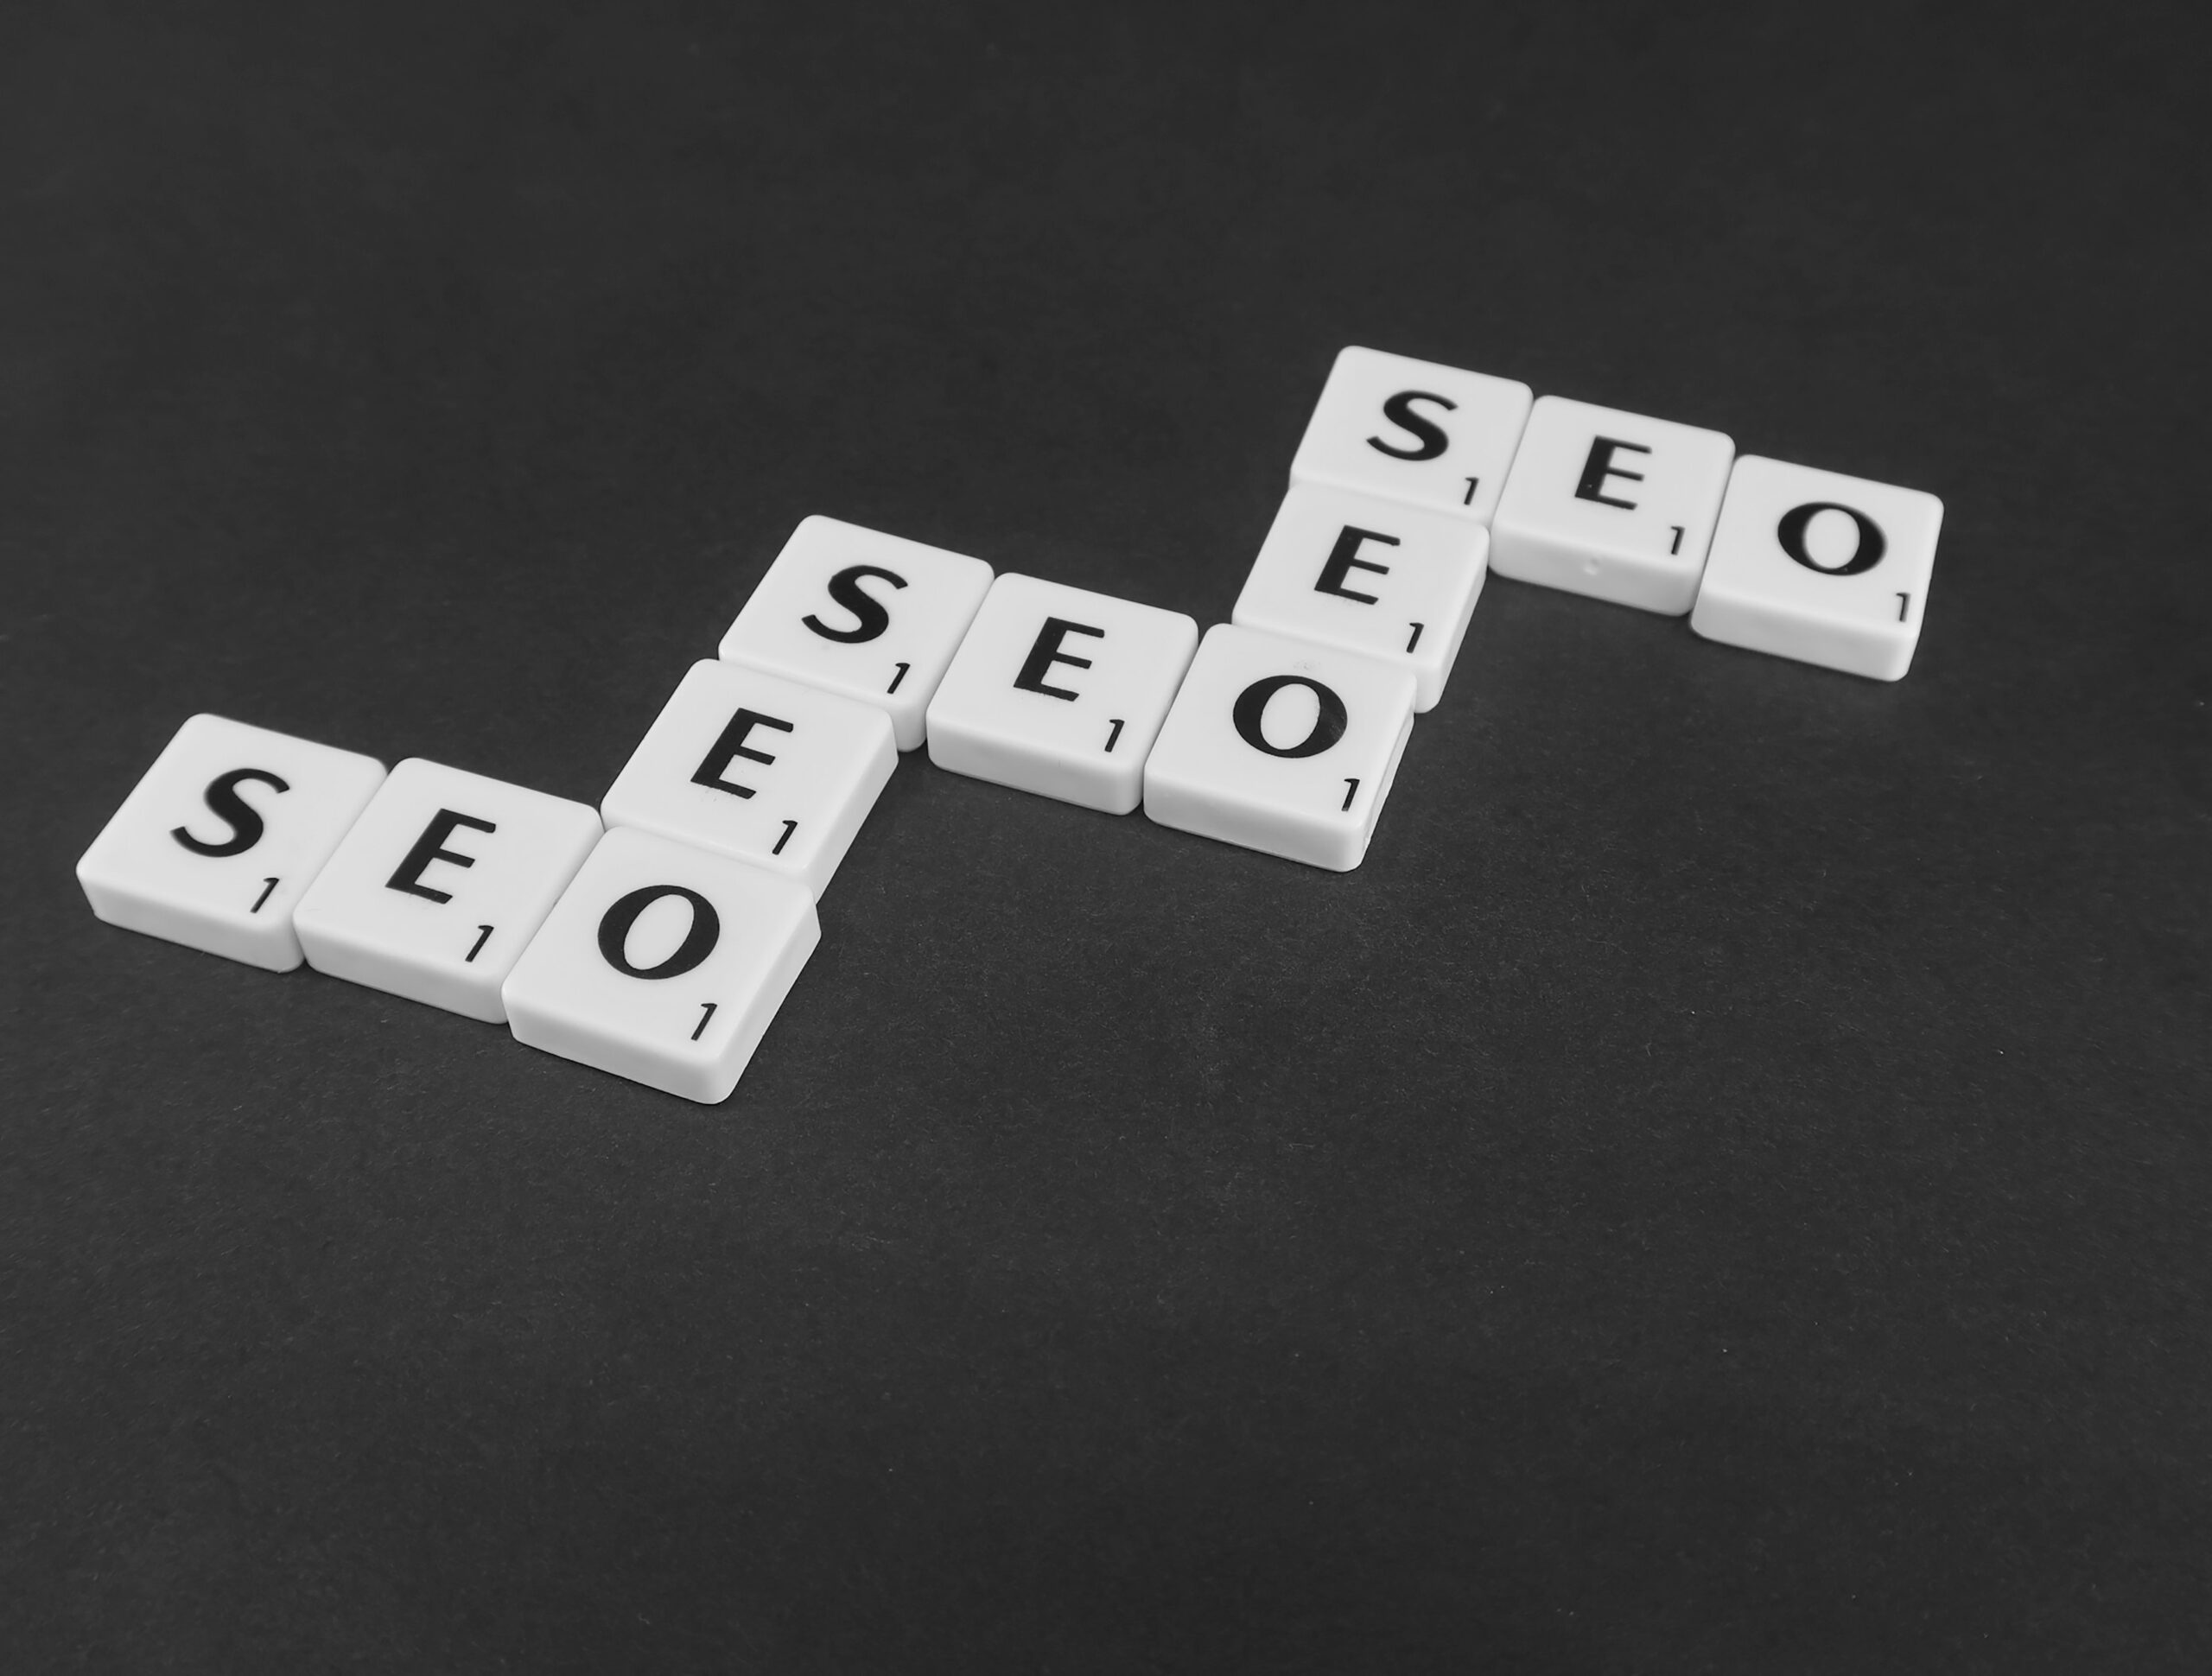 SEO 101: Become visible in search engines